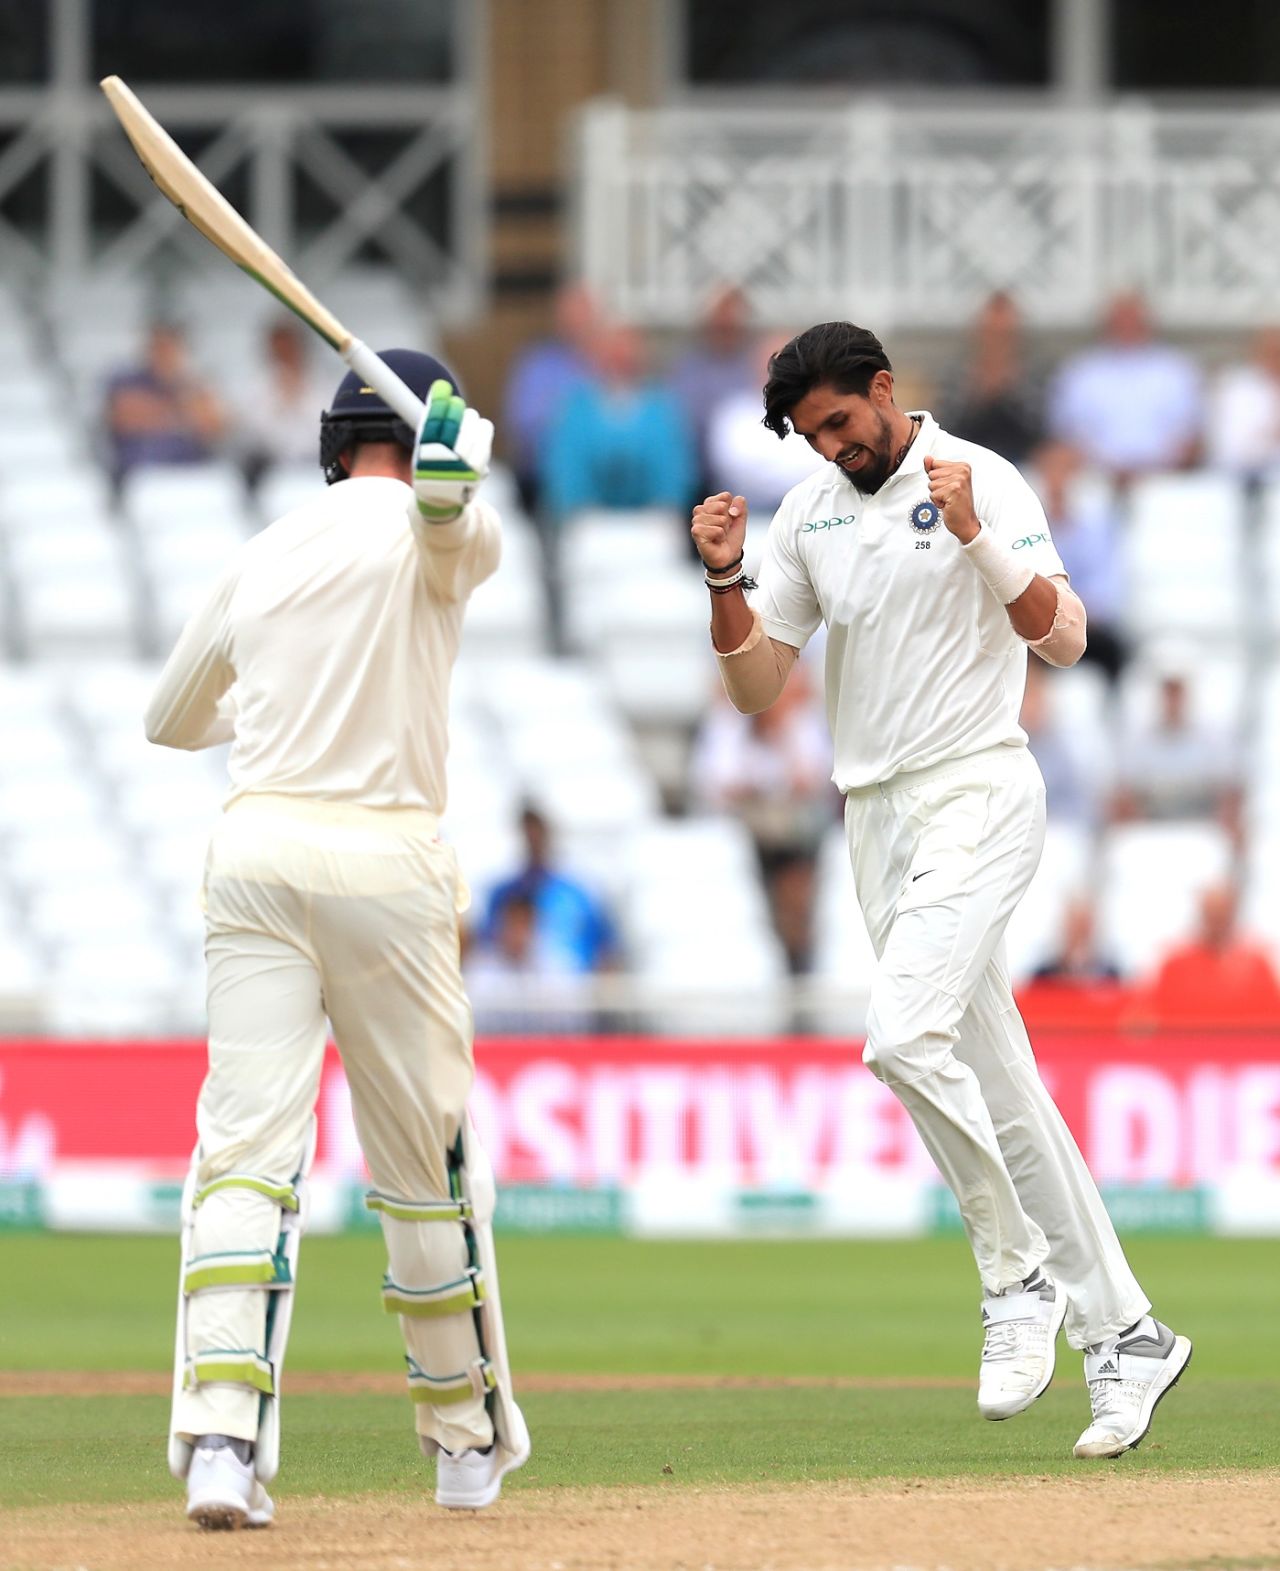 A wicket falls, Ishant Sharma is elated, Keaton Jennings is annoyed, England v India, 3rd Test, Trent Bridge, 4th day, August 21, 2018